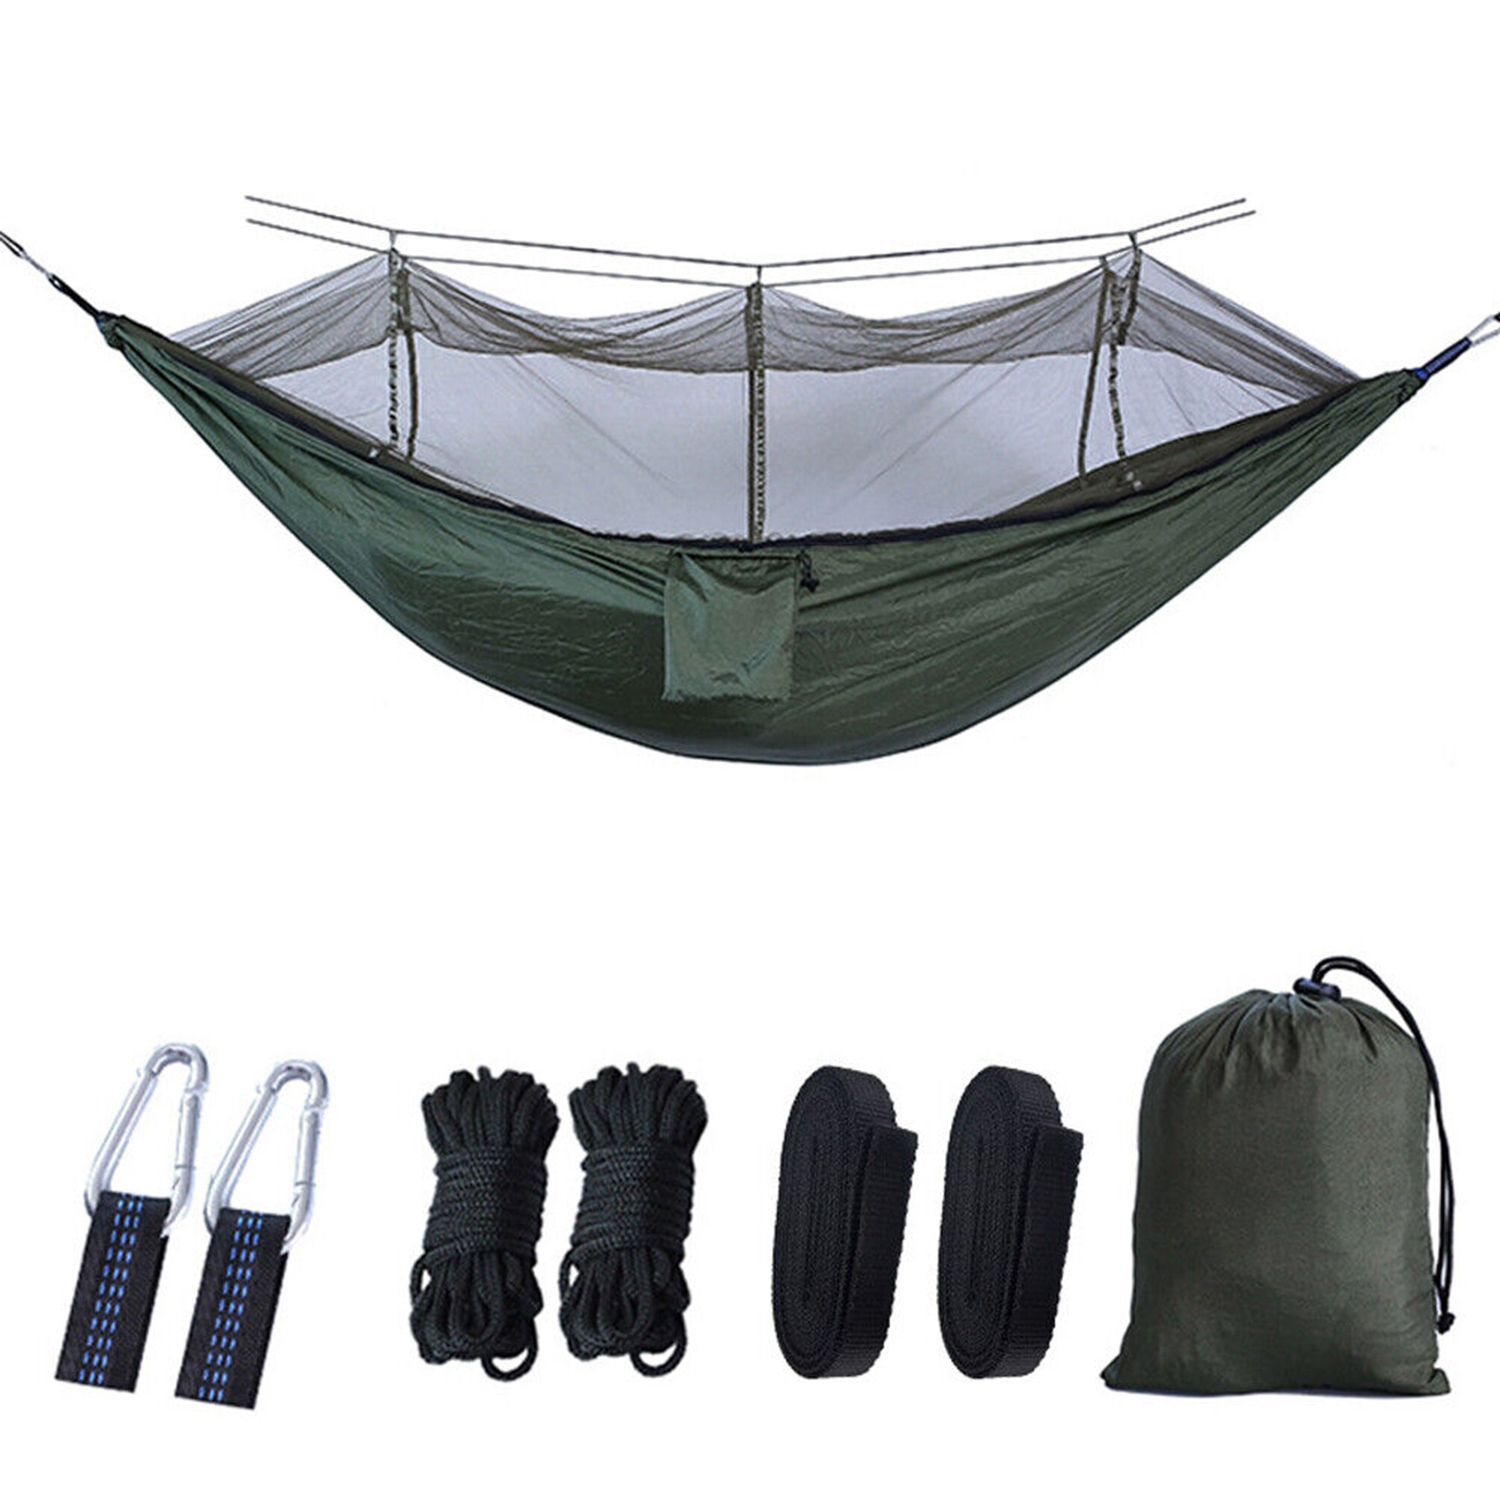 Double Hammock High Capacity & Tear Resistance Camping Hammock with Net for Backpacking, Travel, Beach, Camping, Hiking - image 1 of 7